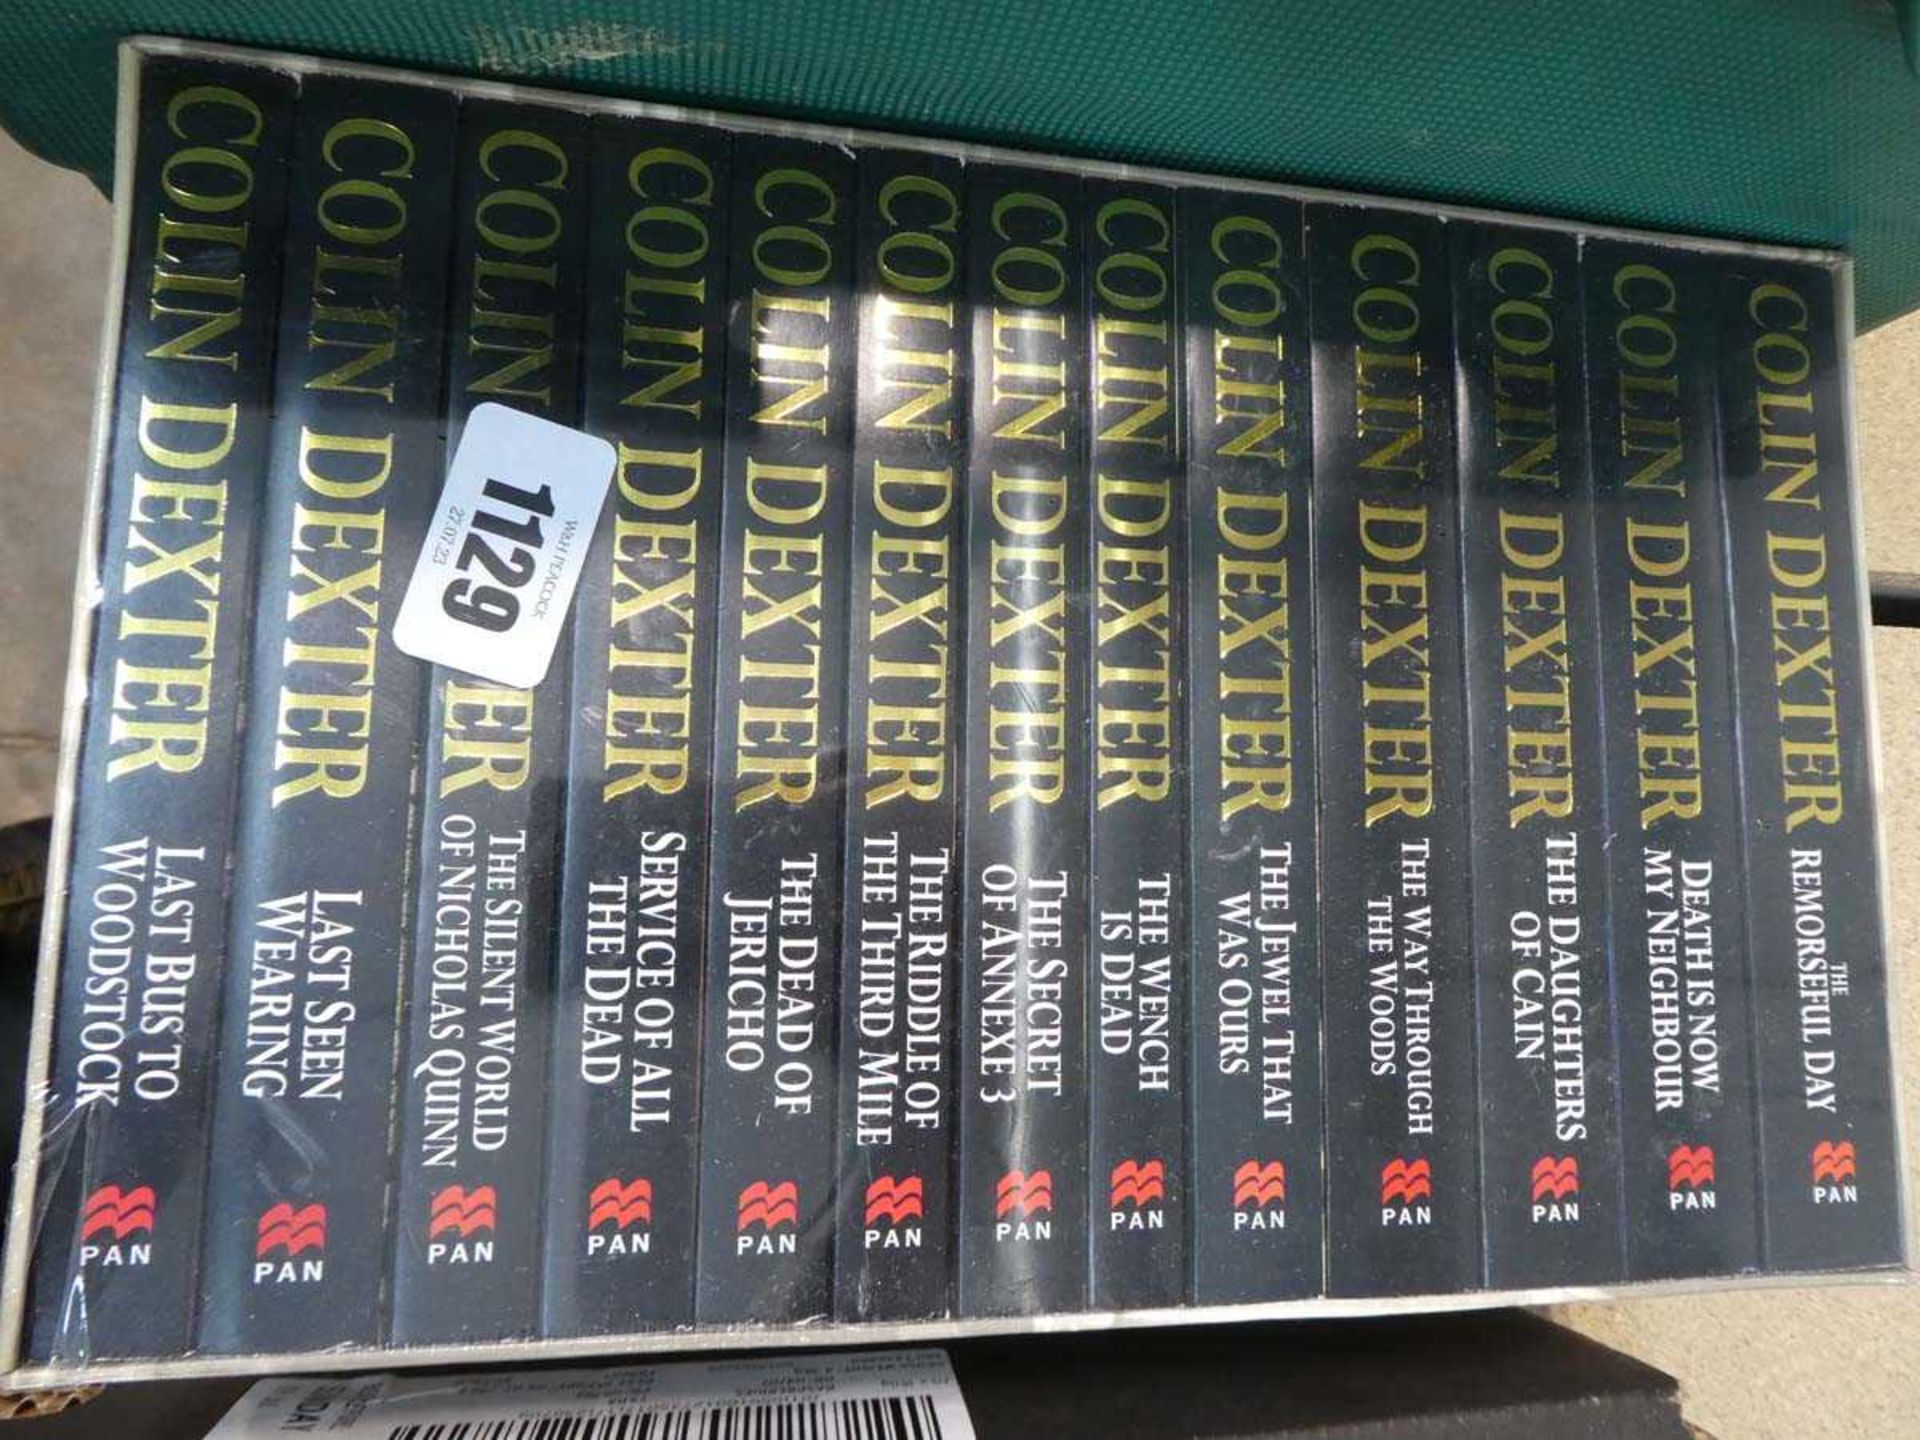 Inspector Morse Books by Colin Dexter; complete collection